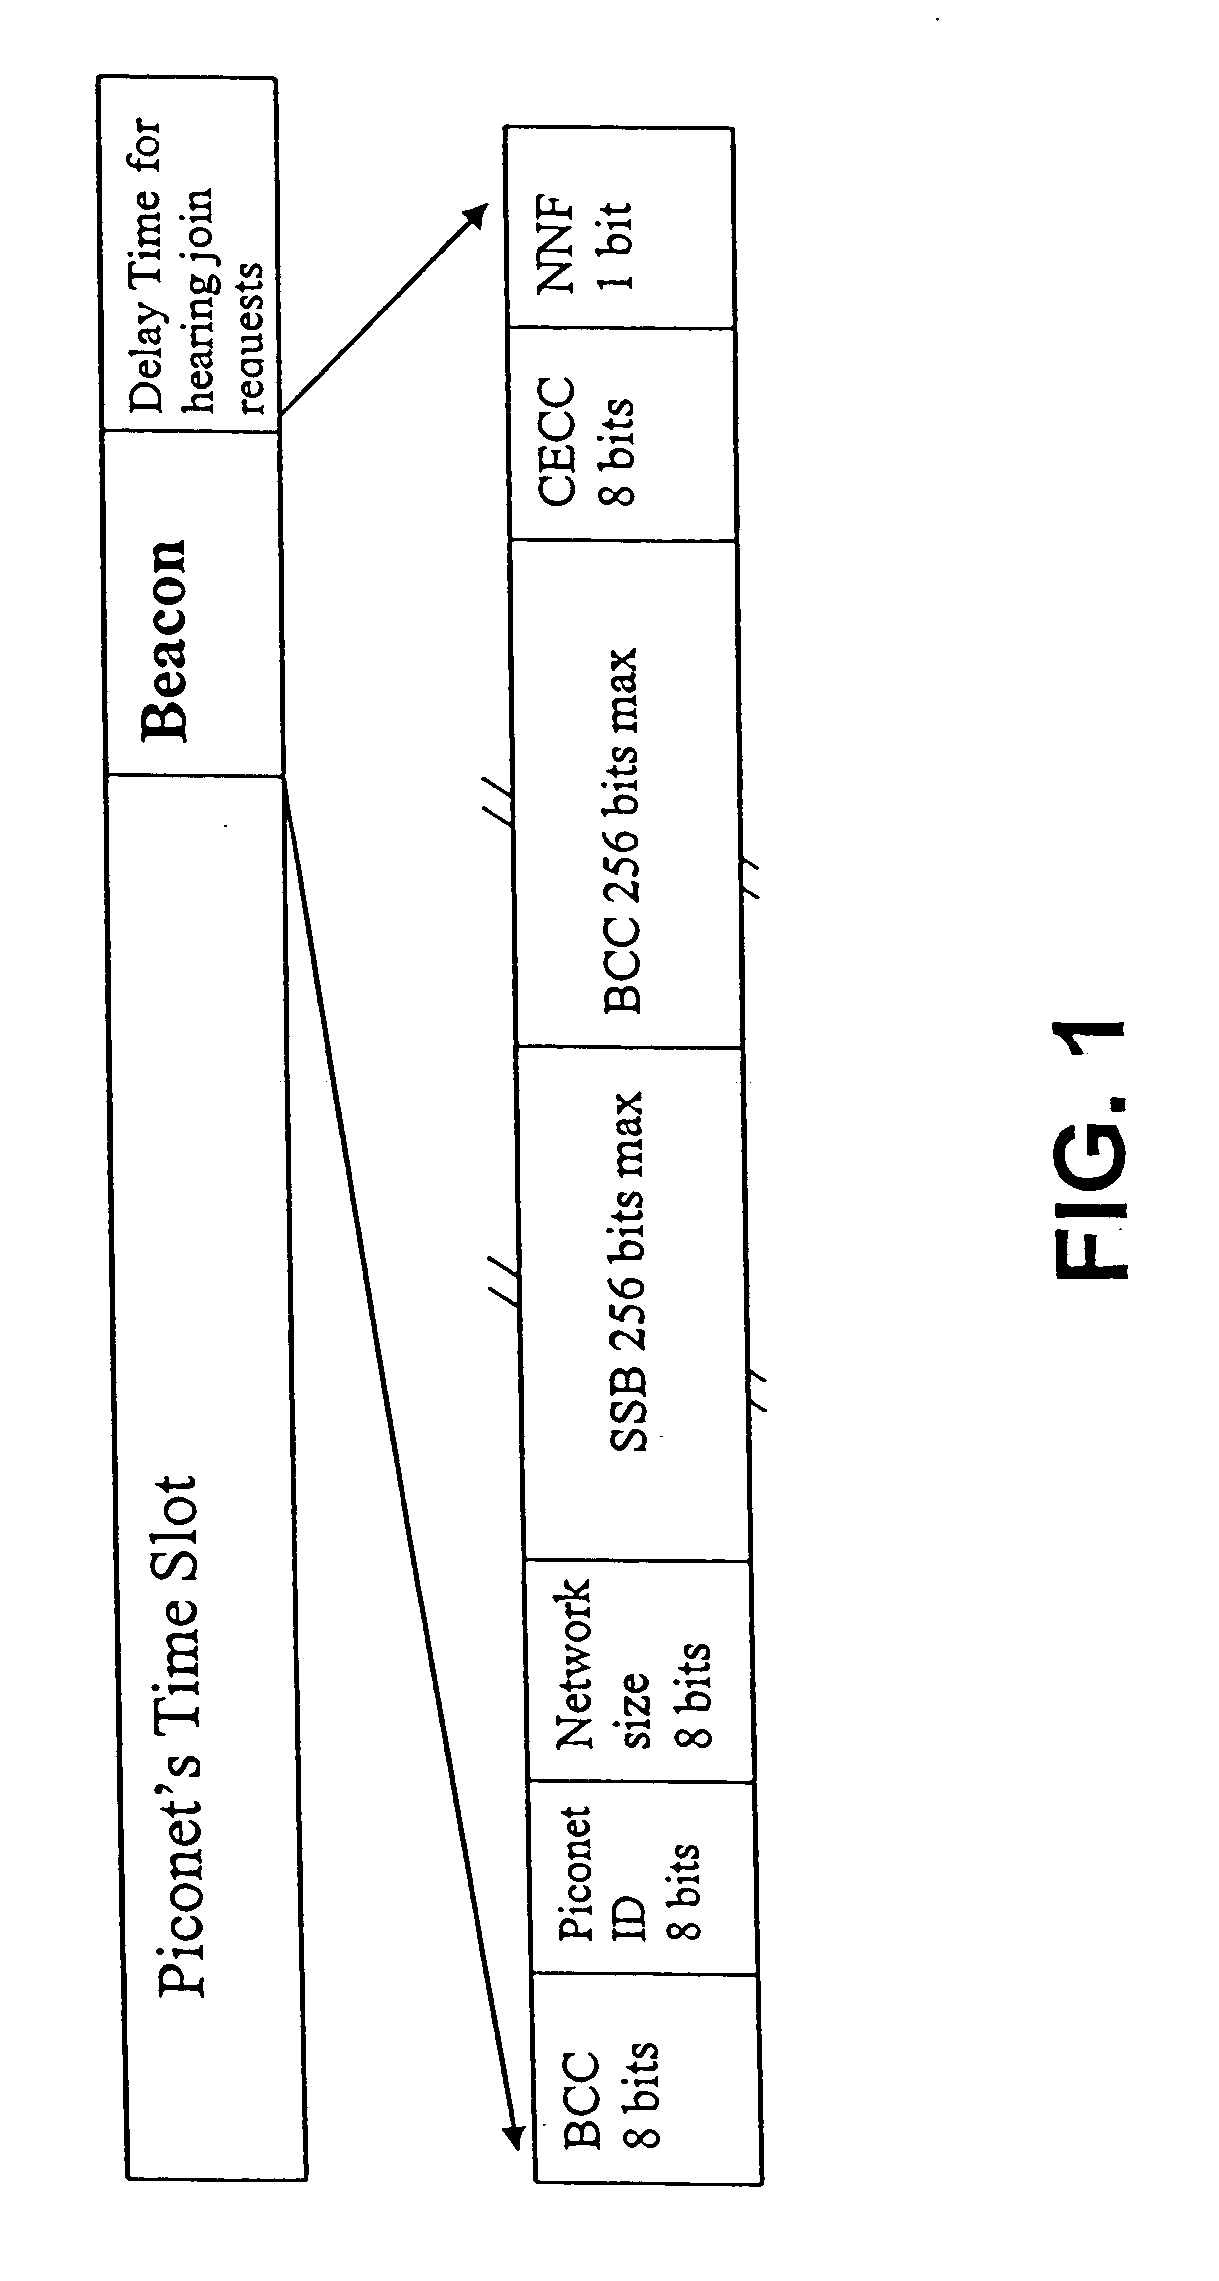 Method of creating, controlling, and maintaining a wireless communication mesh of piconets